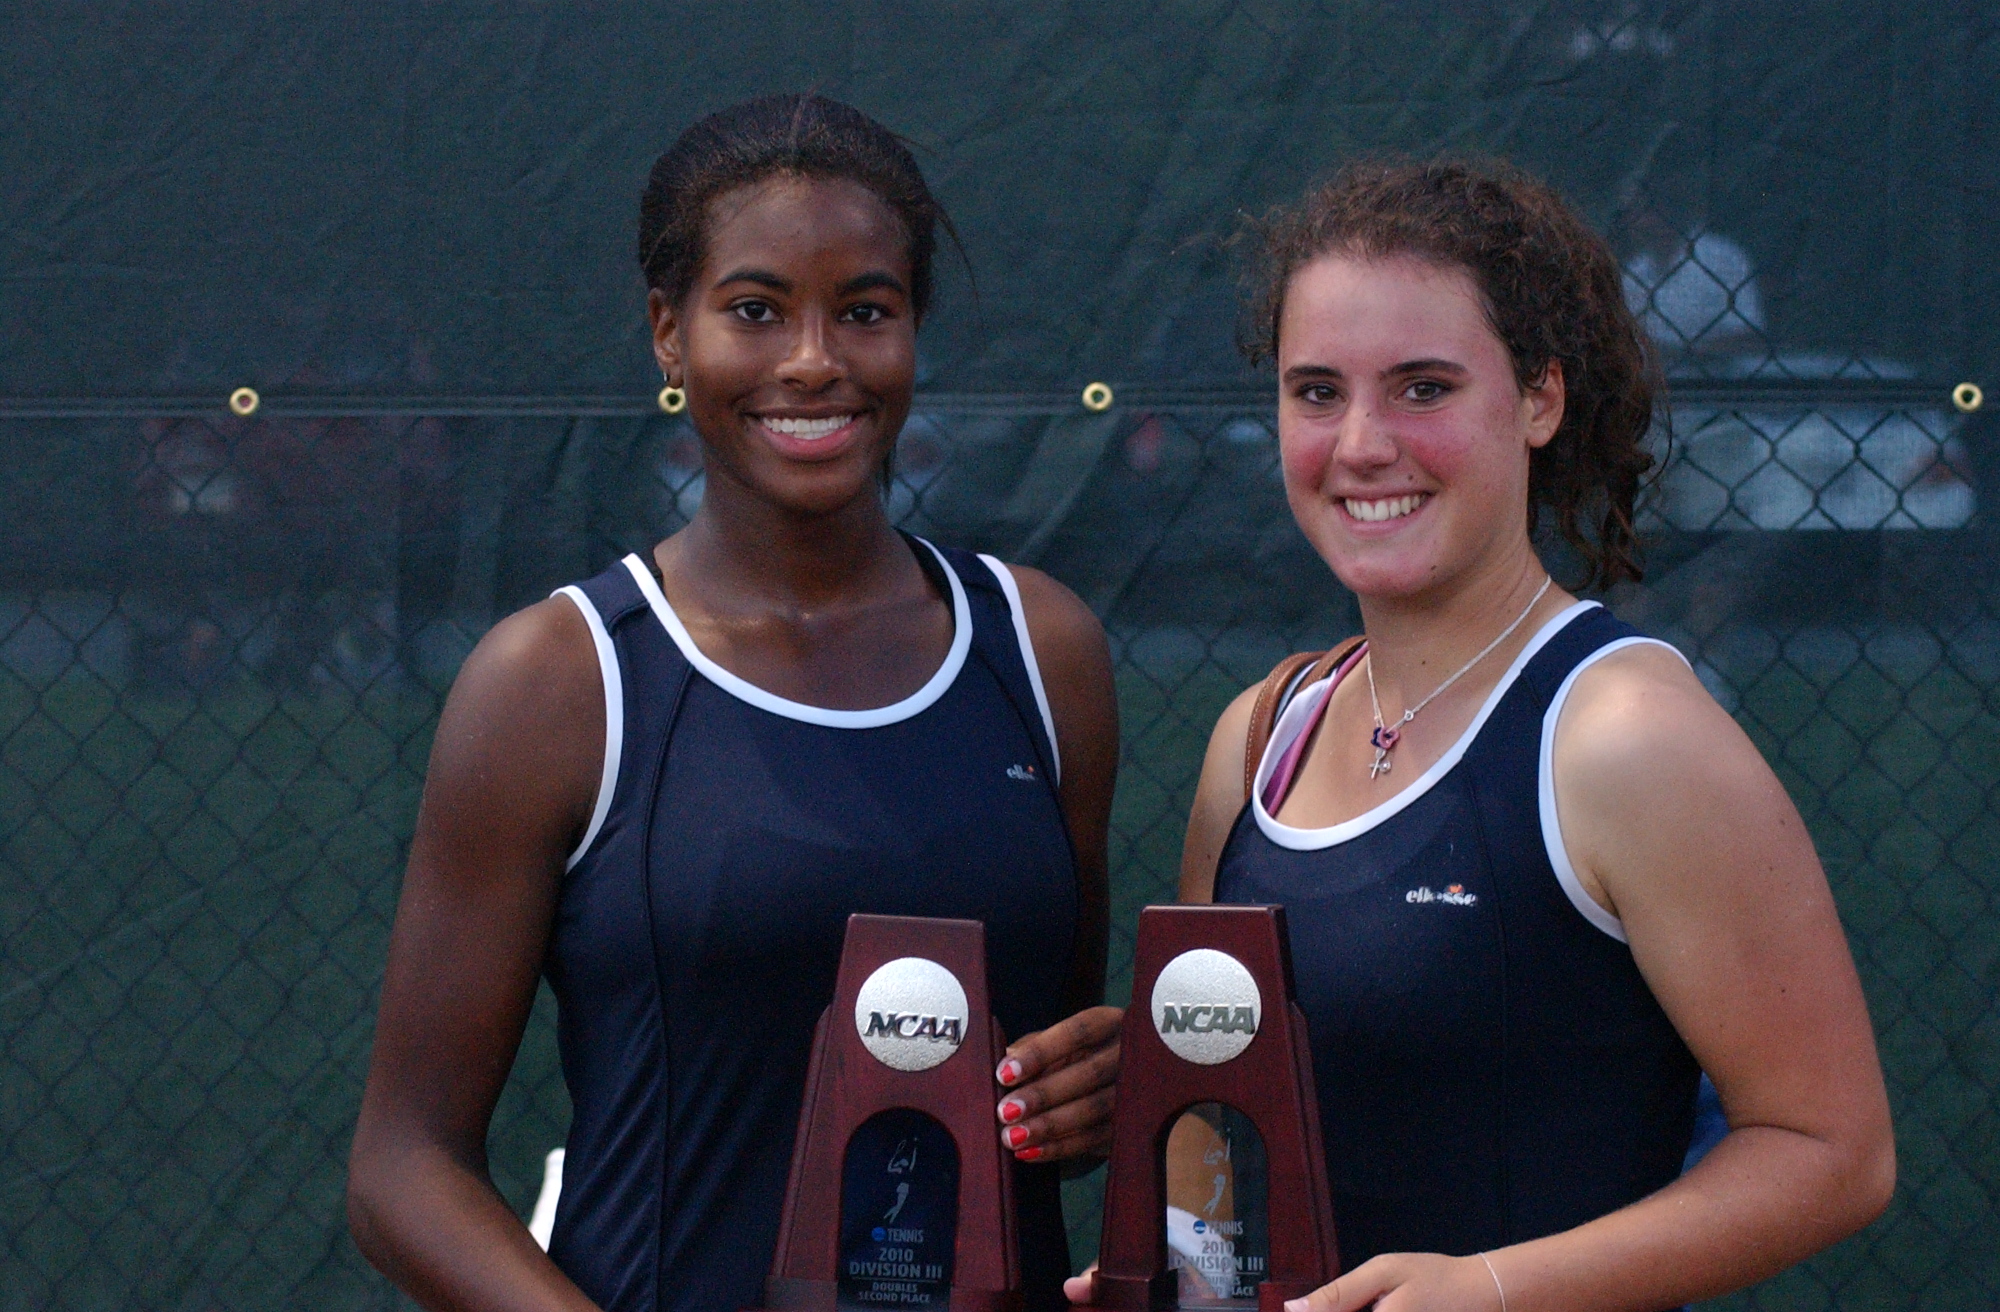 Dawson & McManigle Earn Runner-Up Honors At NCAA D-III Doubles Championship